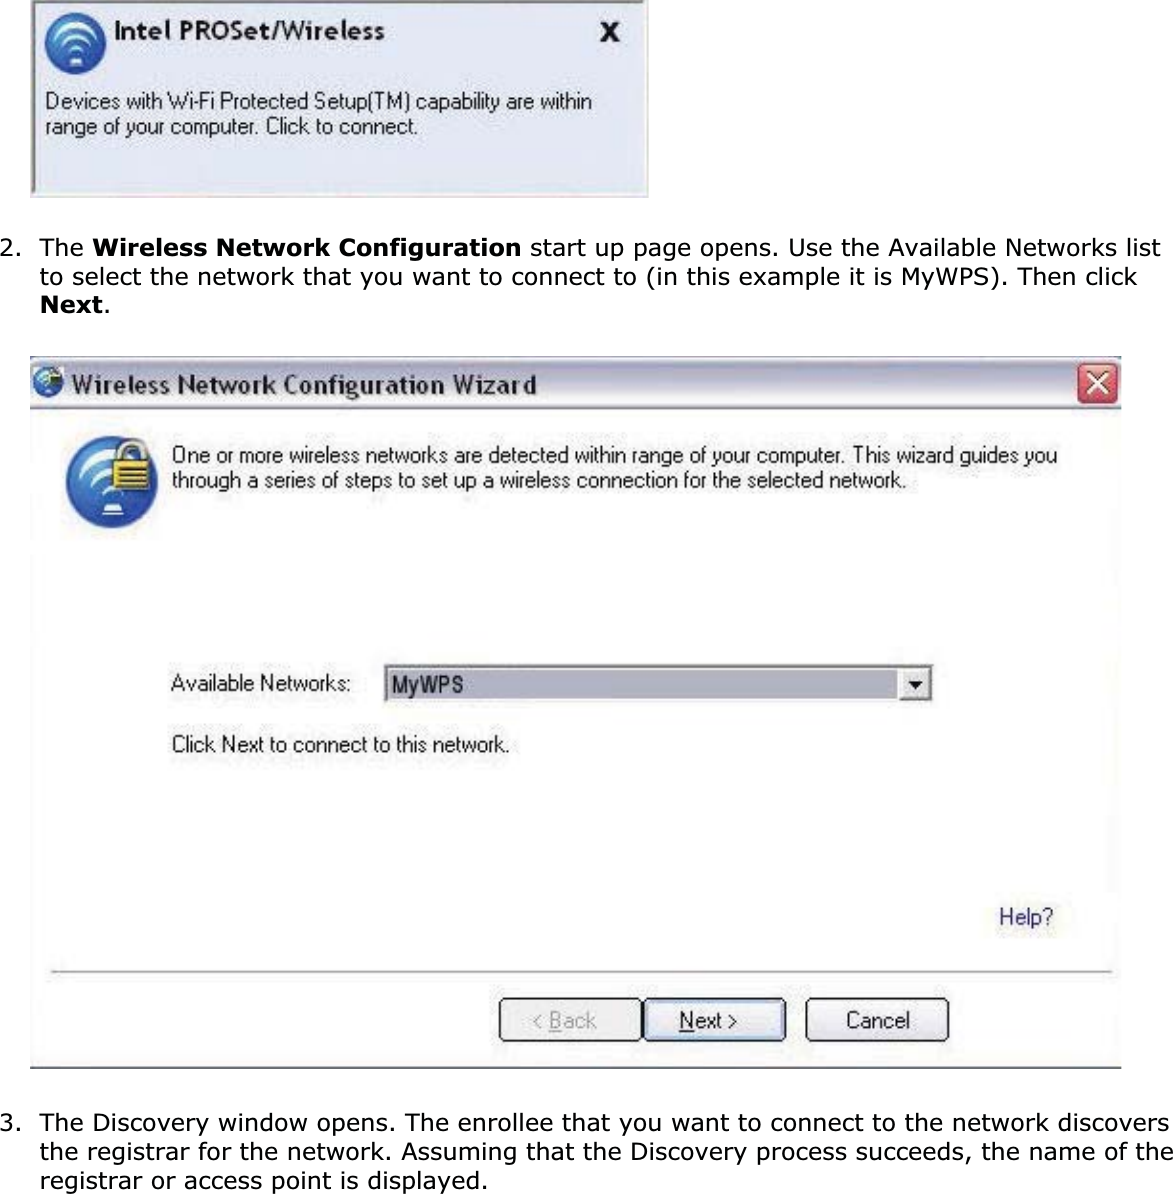 2. The Wireless Network Configuration start up page opens. Use the Available Networks list to select the network that you want to connect to (in this example it is MyWPS). Then click Next.3. The Discovery window opens. The enrollee that you want to connect to the network discovers the registrar for the network. Assuming that the Discovery process succeeds, the name of the registrar or access point is displayed.